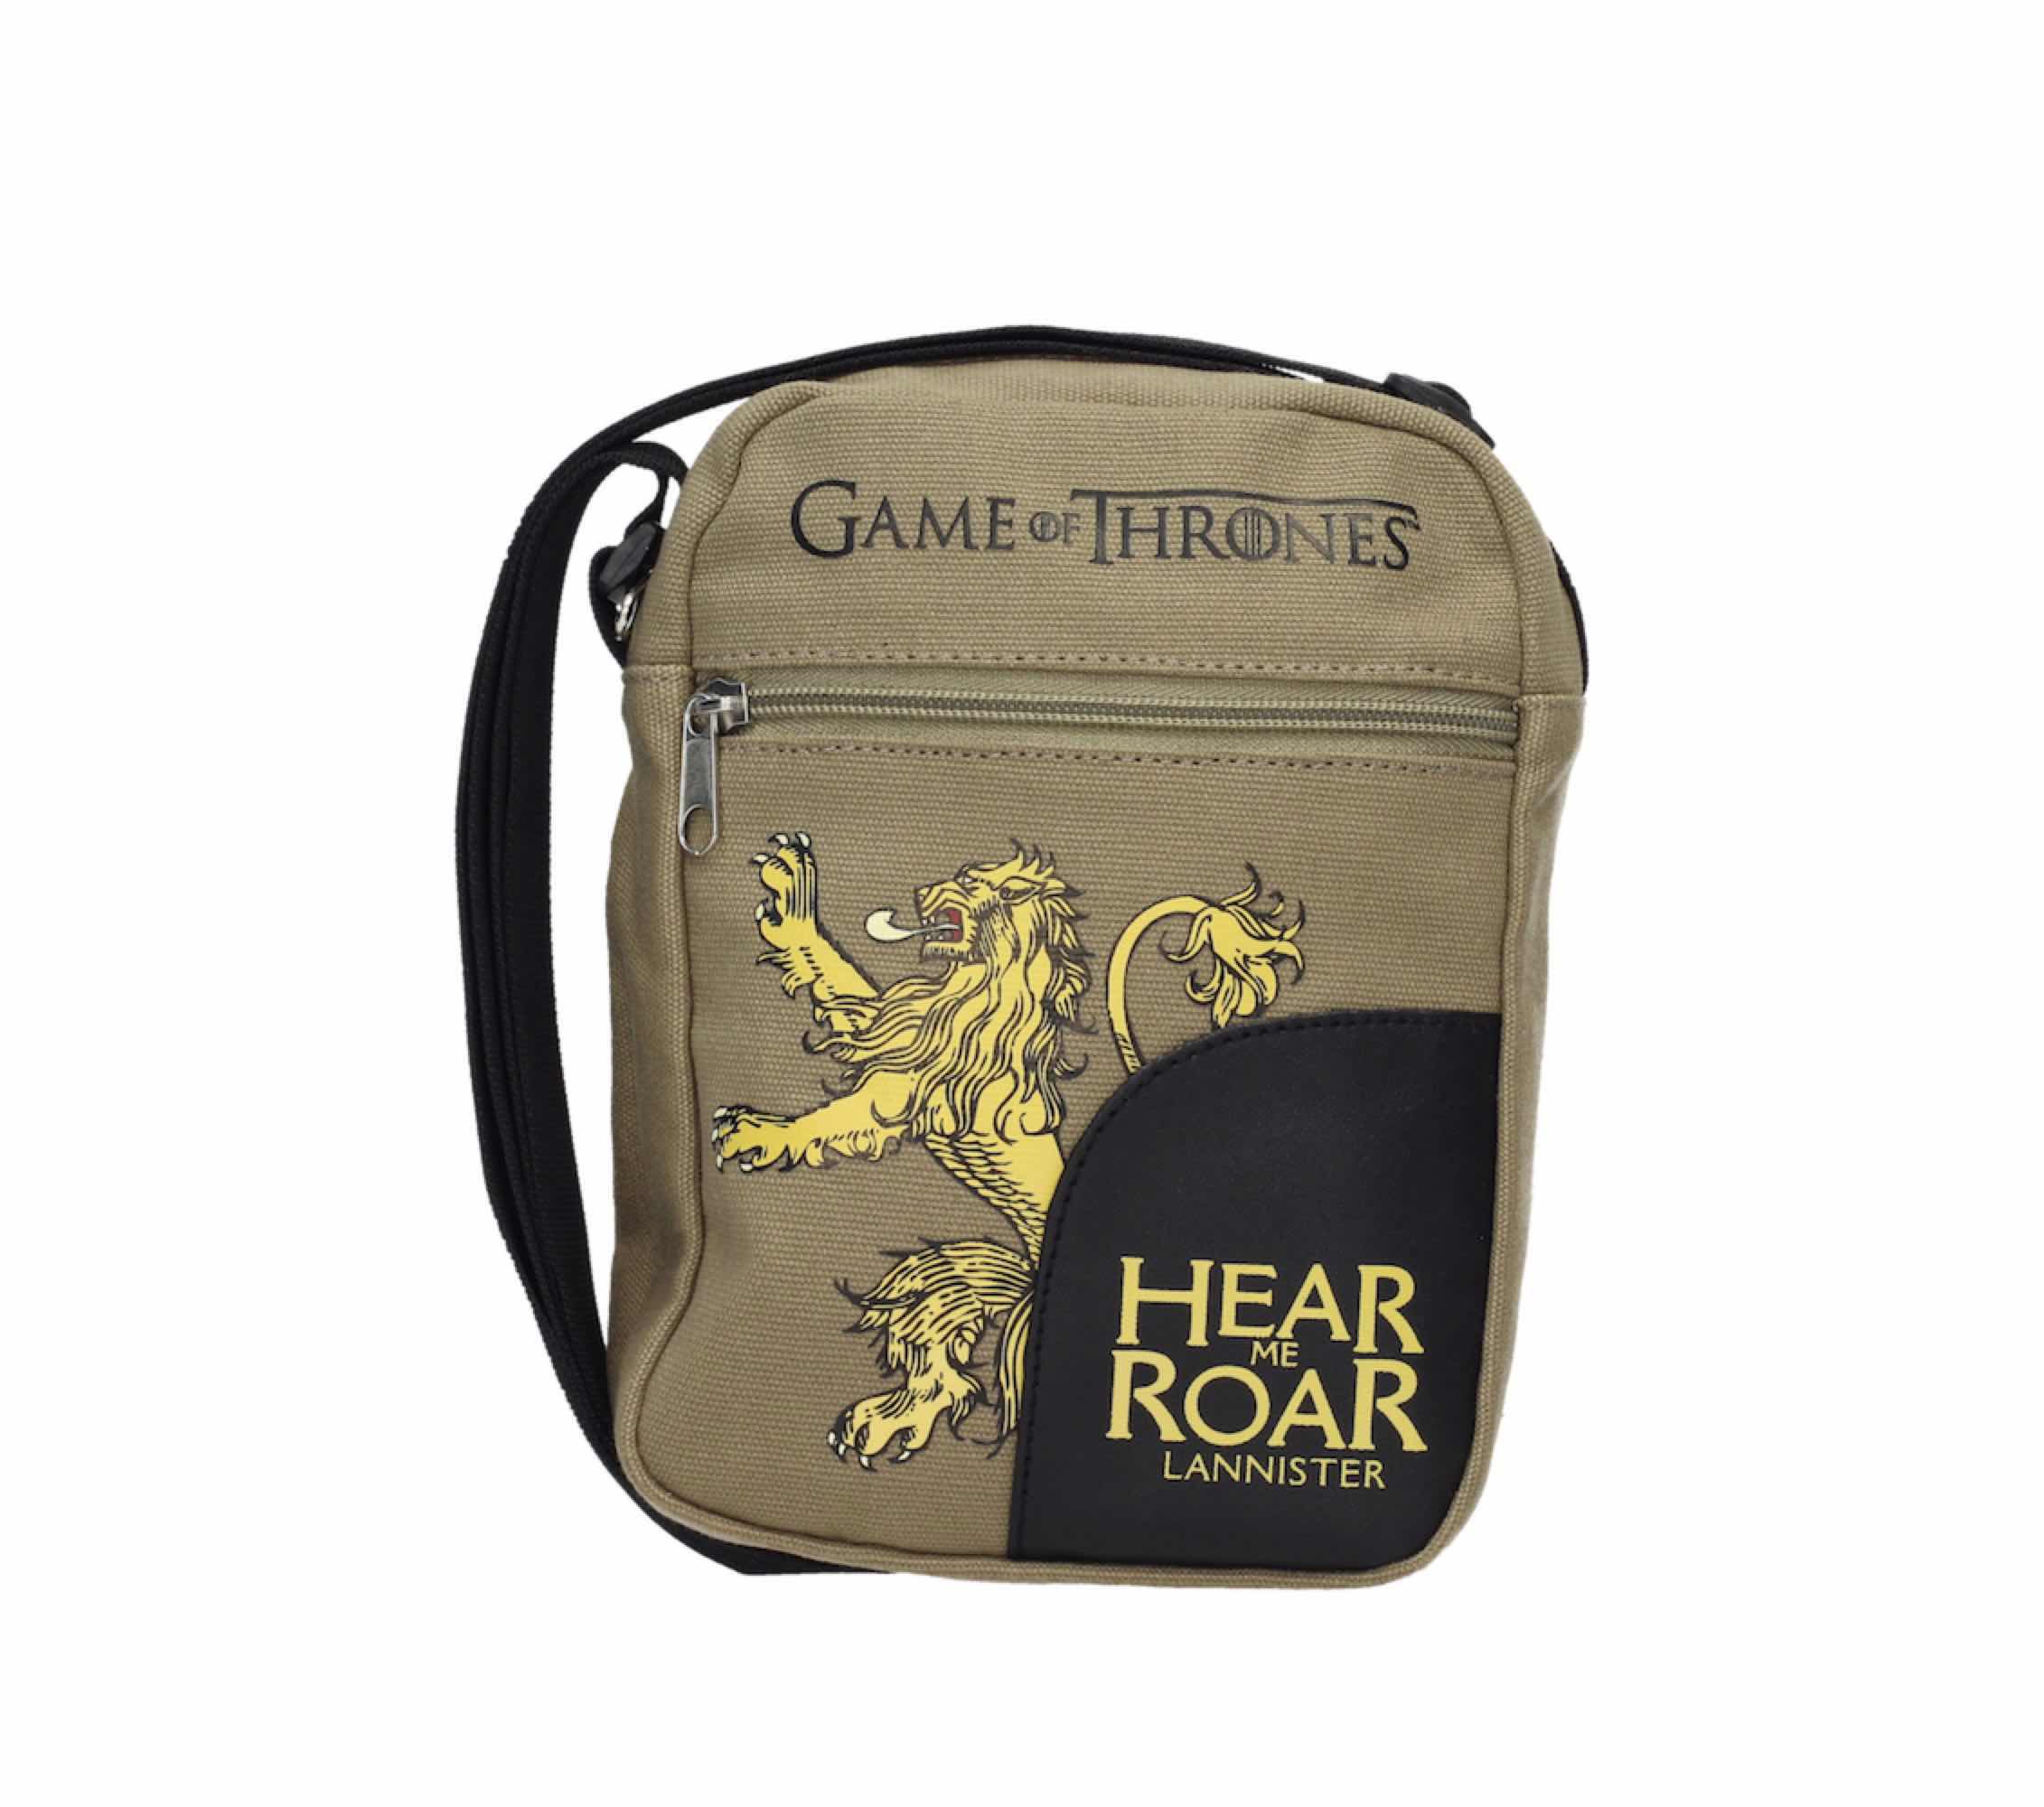 Game Of Thrones Sac Besace Petit Modele Lannister